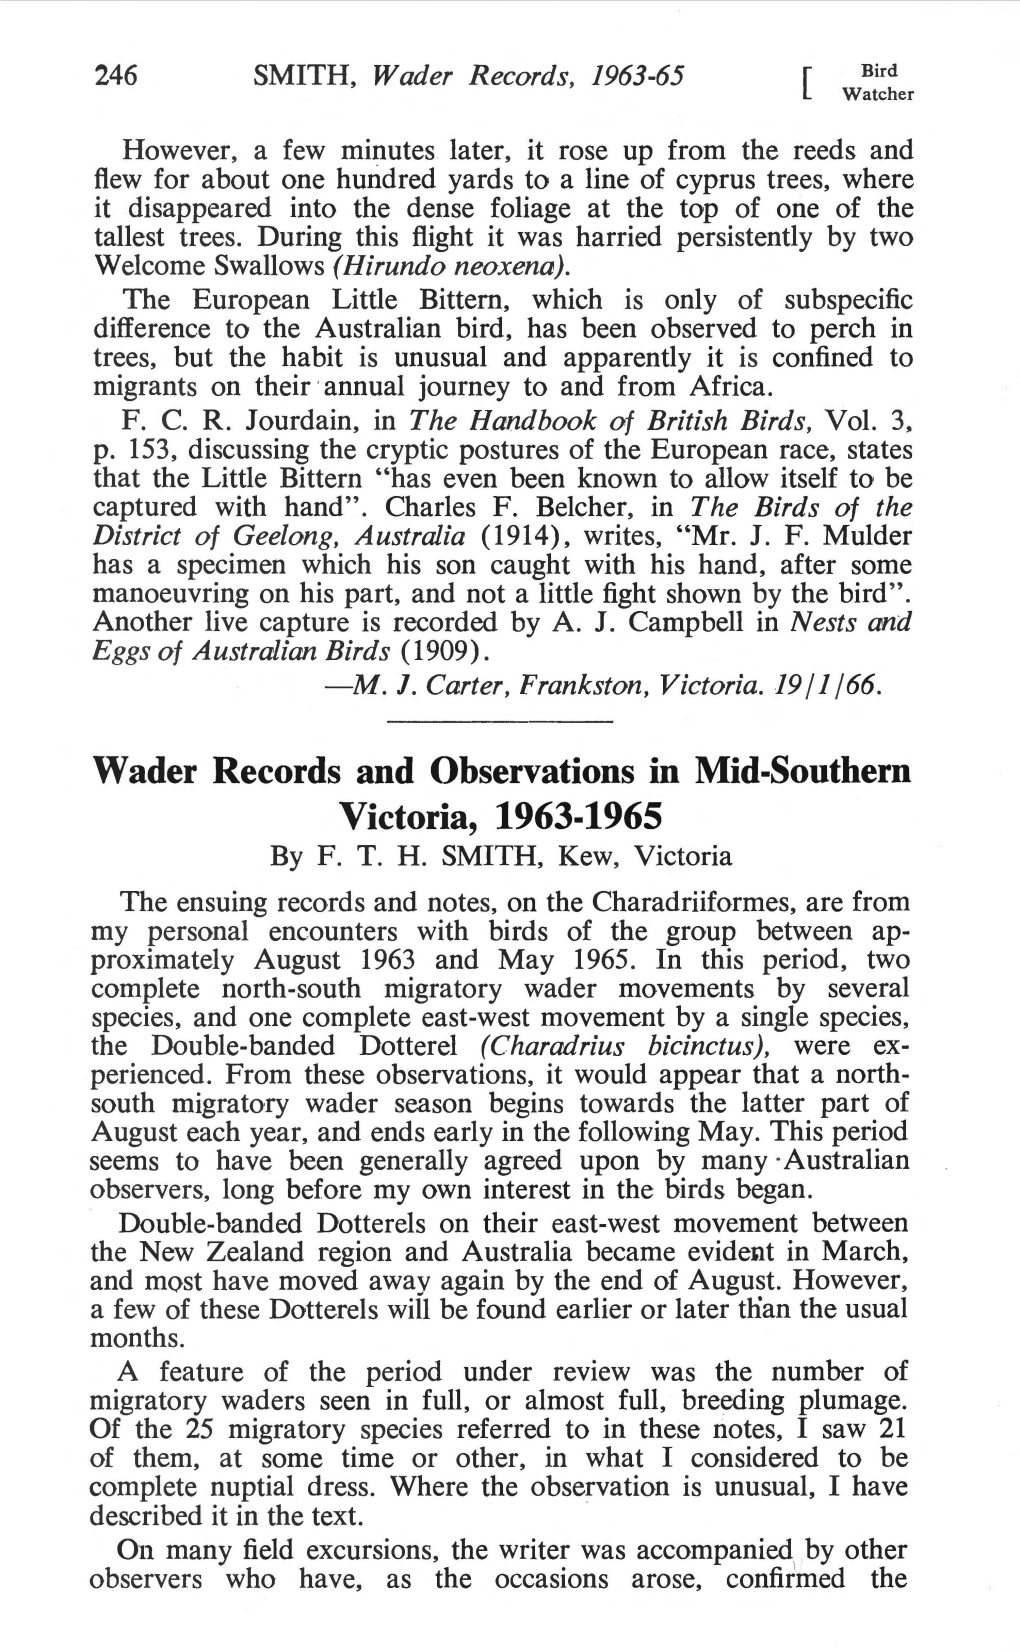 Wader Records and Observations in Mid-Southern Victoria, 1963-1965 by F